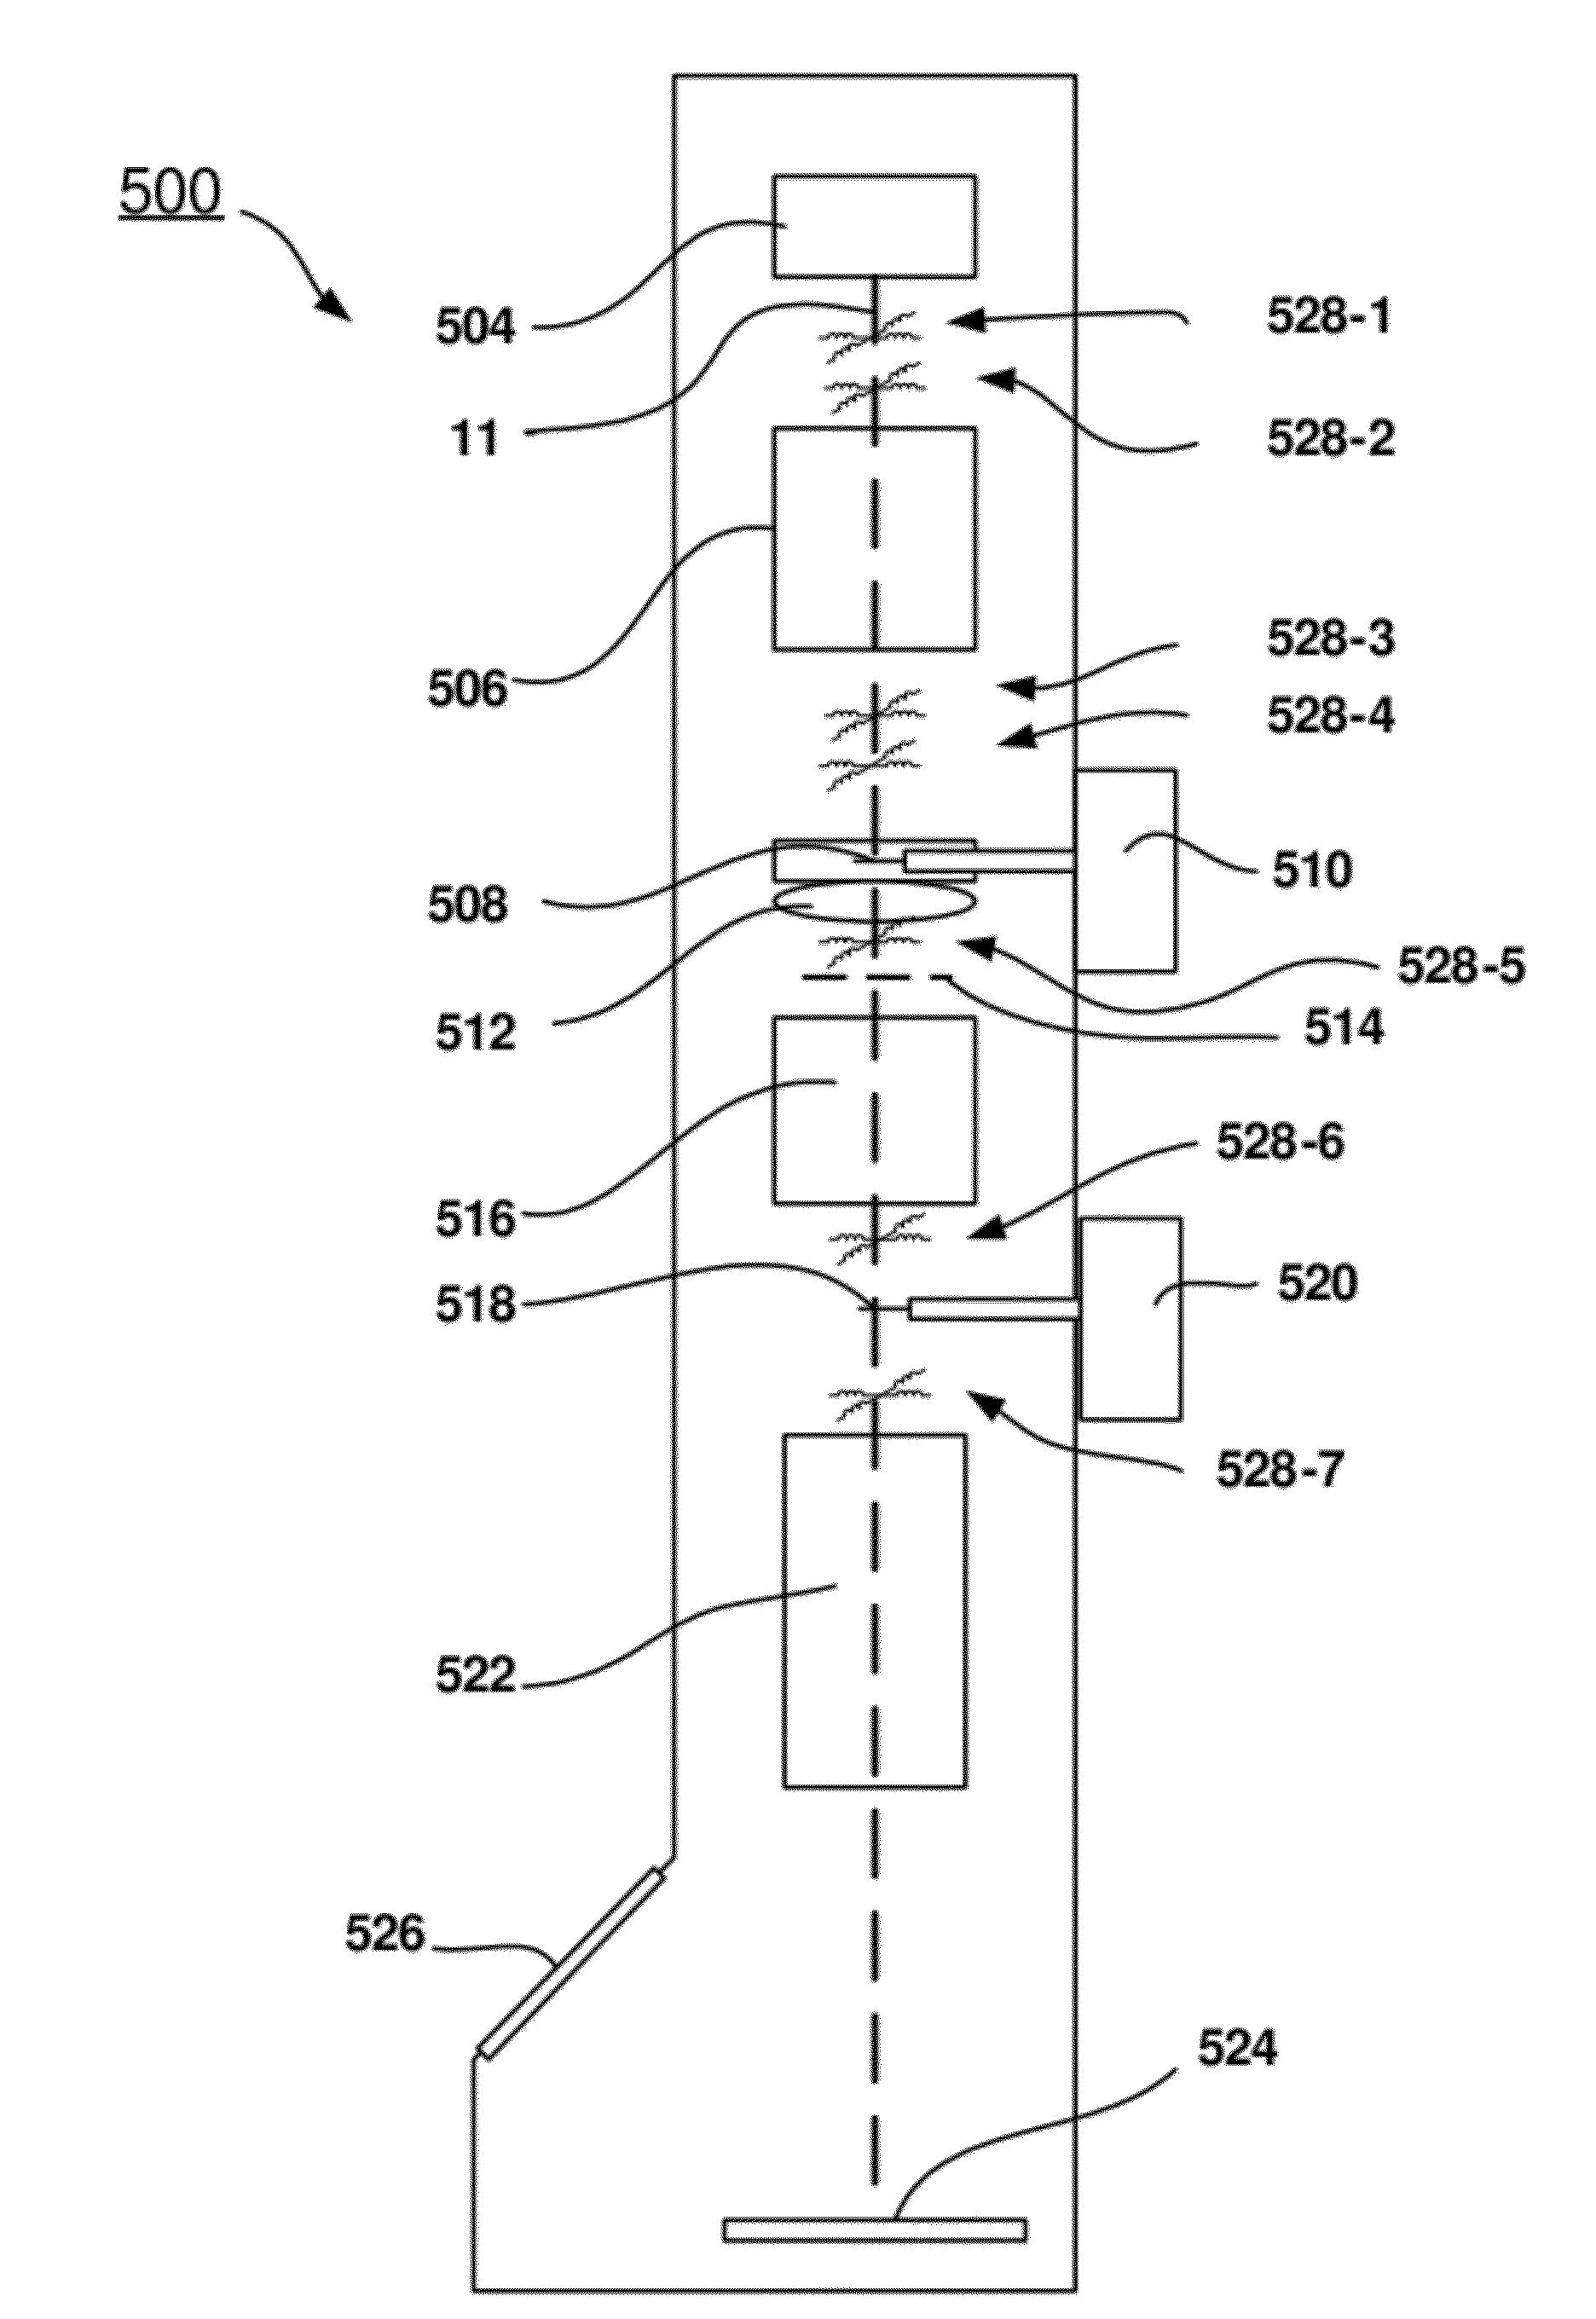 Method for Centering an Optical Element in a TEM Comprising a Contrast Enhancing Element